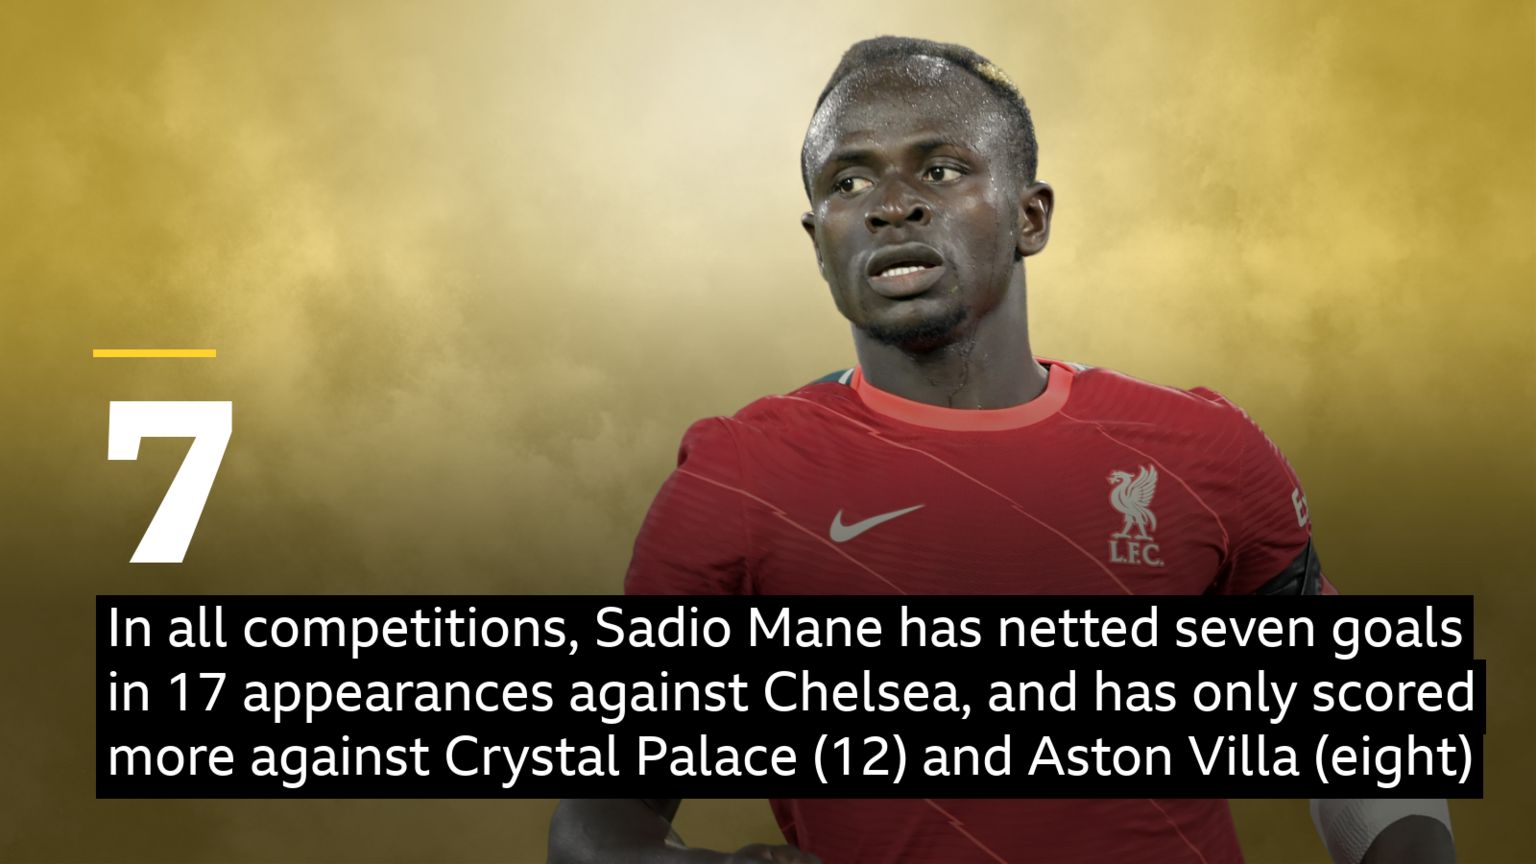 Sadio Mane stat - In all competitions, Liverpool’s Sadio Mané has netted seven goals in 17 appearances against Chelsea, with the Senegalese only netting more against Crystal Palace (12) and Aston Villa (8) during his time in Englan